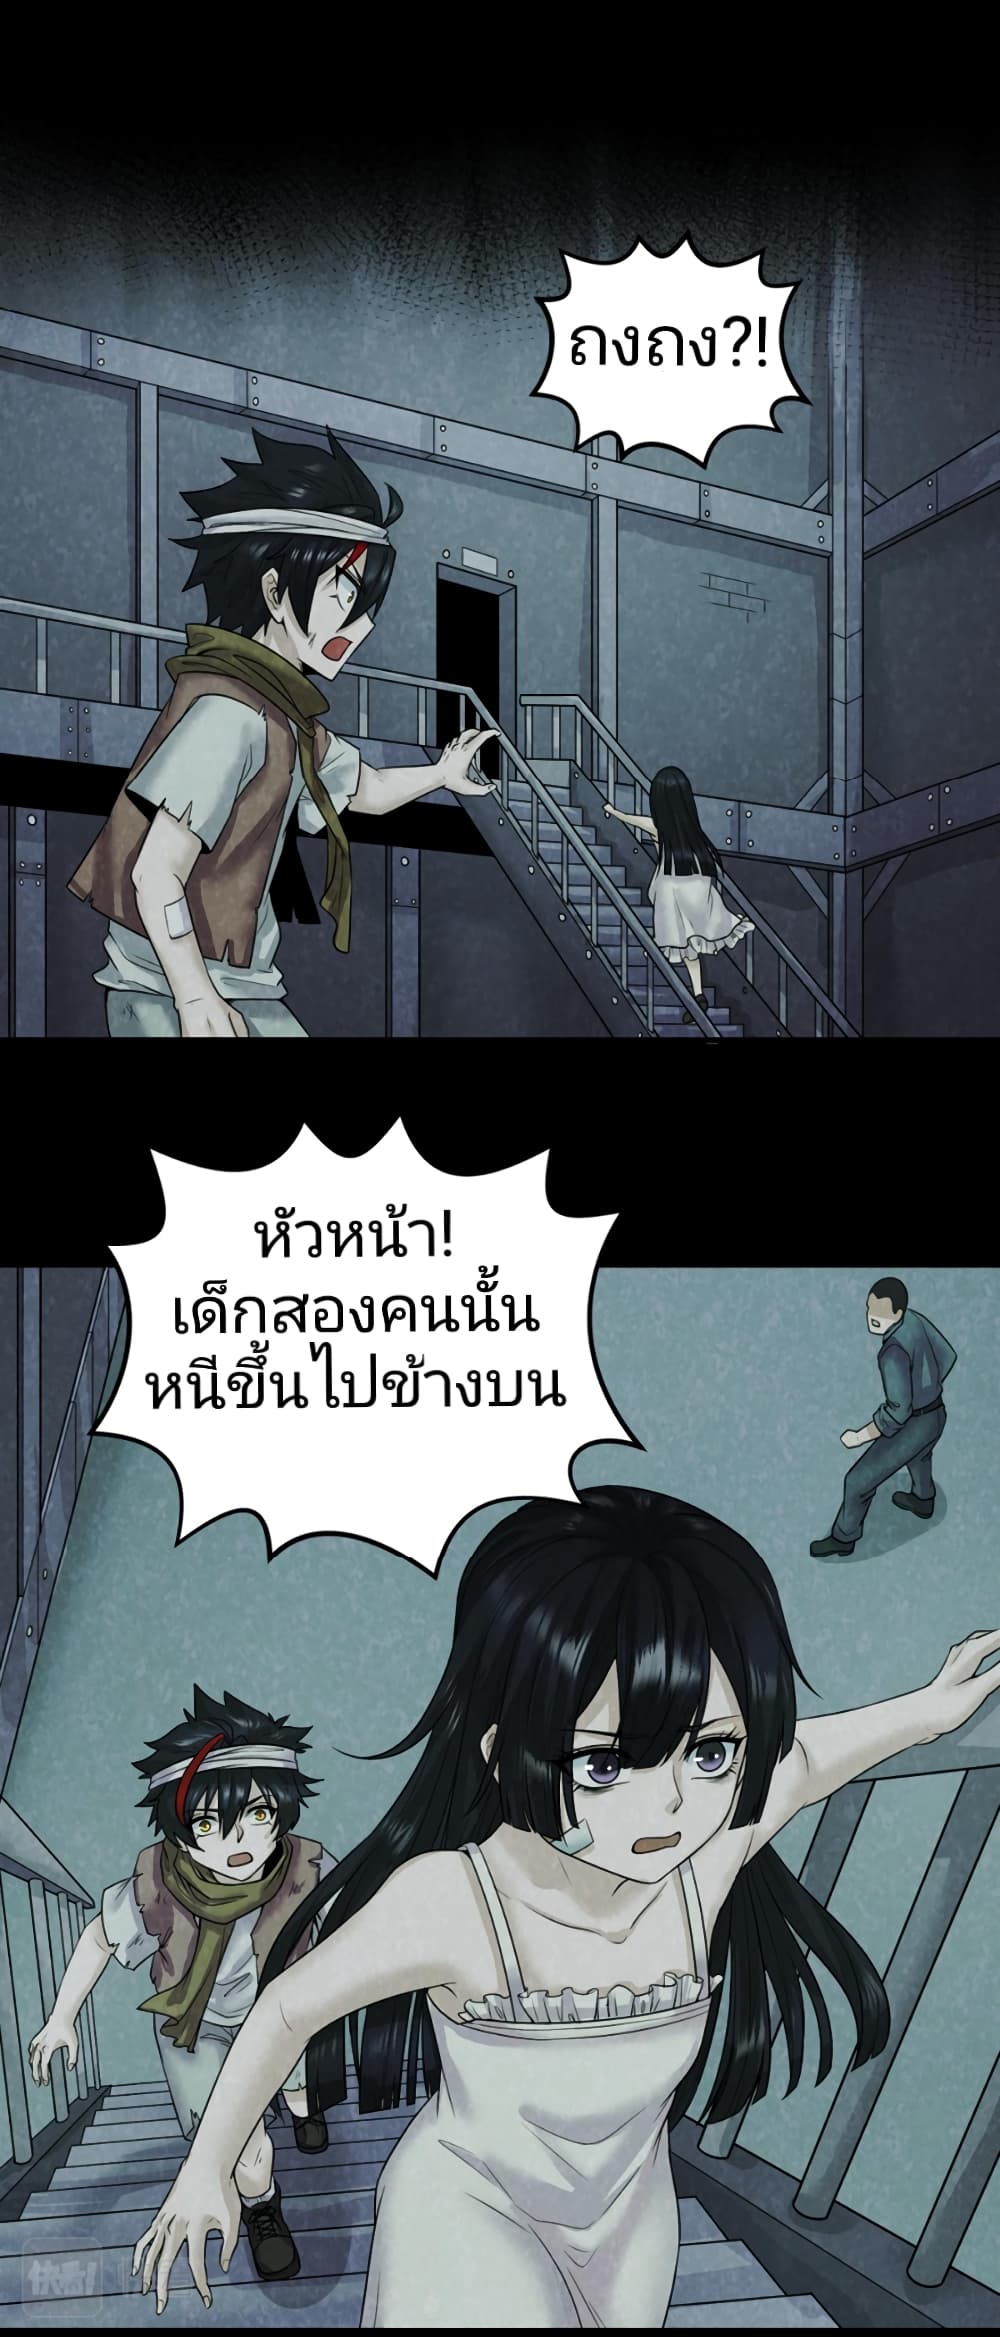 The Age of Ghost Spirits à¸à¸­à¸à¸à¸µà¹ 33 (7)